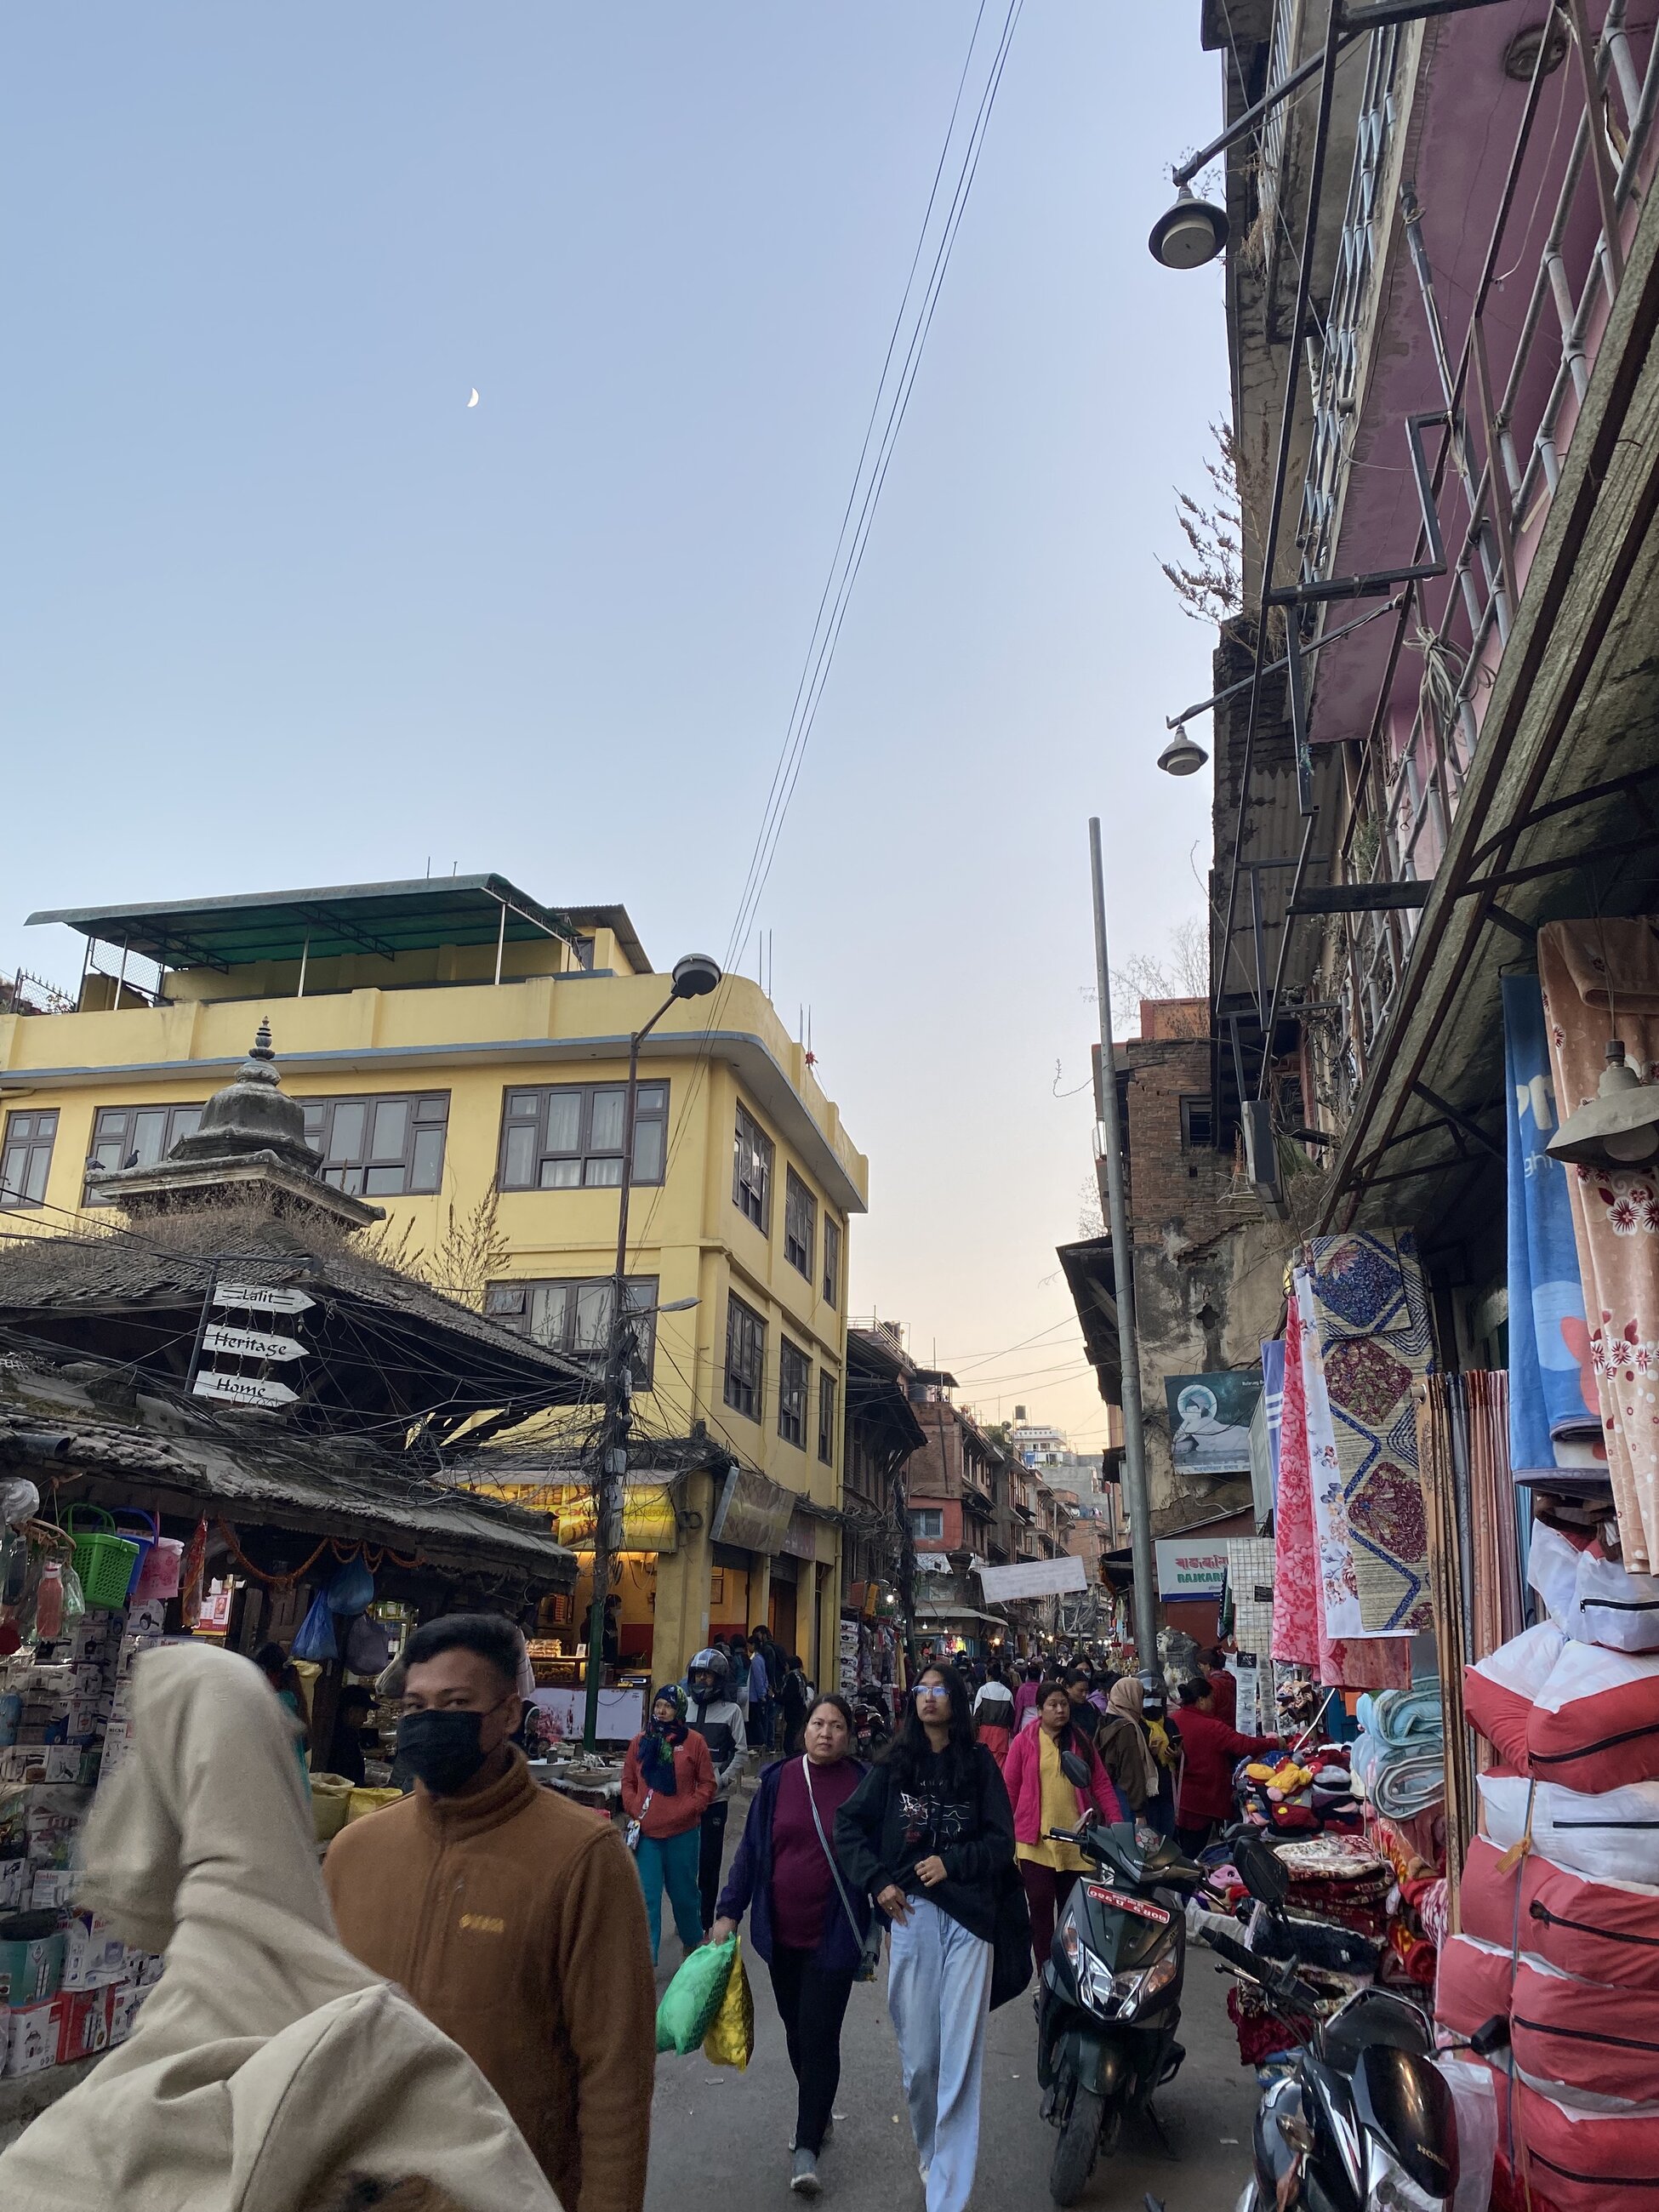 Afternoon in the busy streets of Thamal